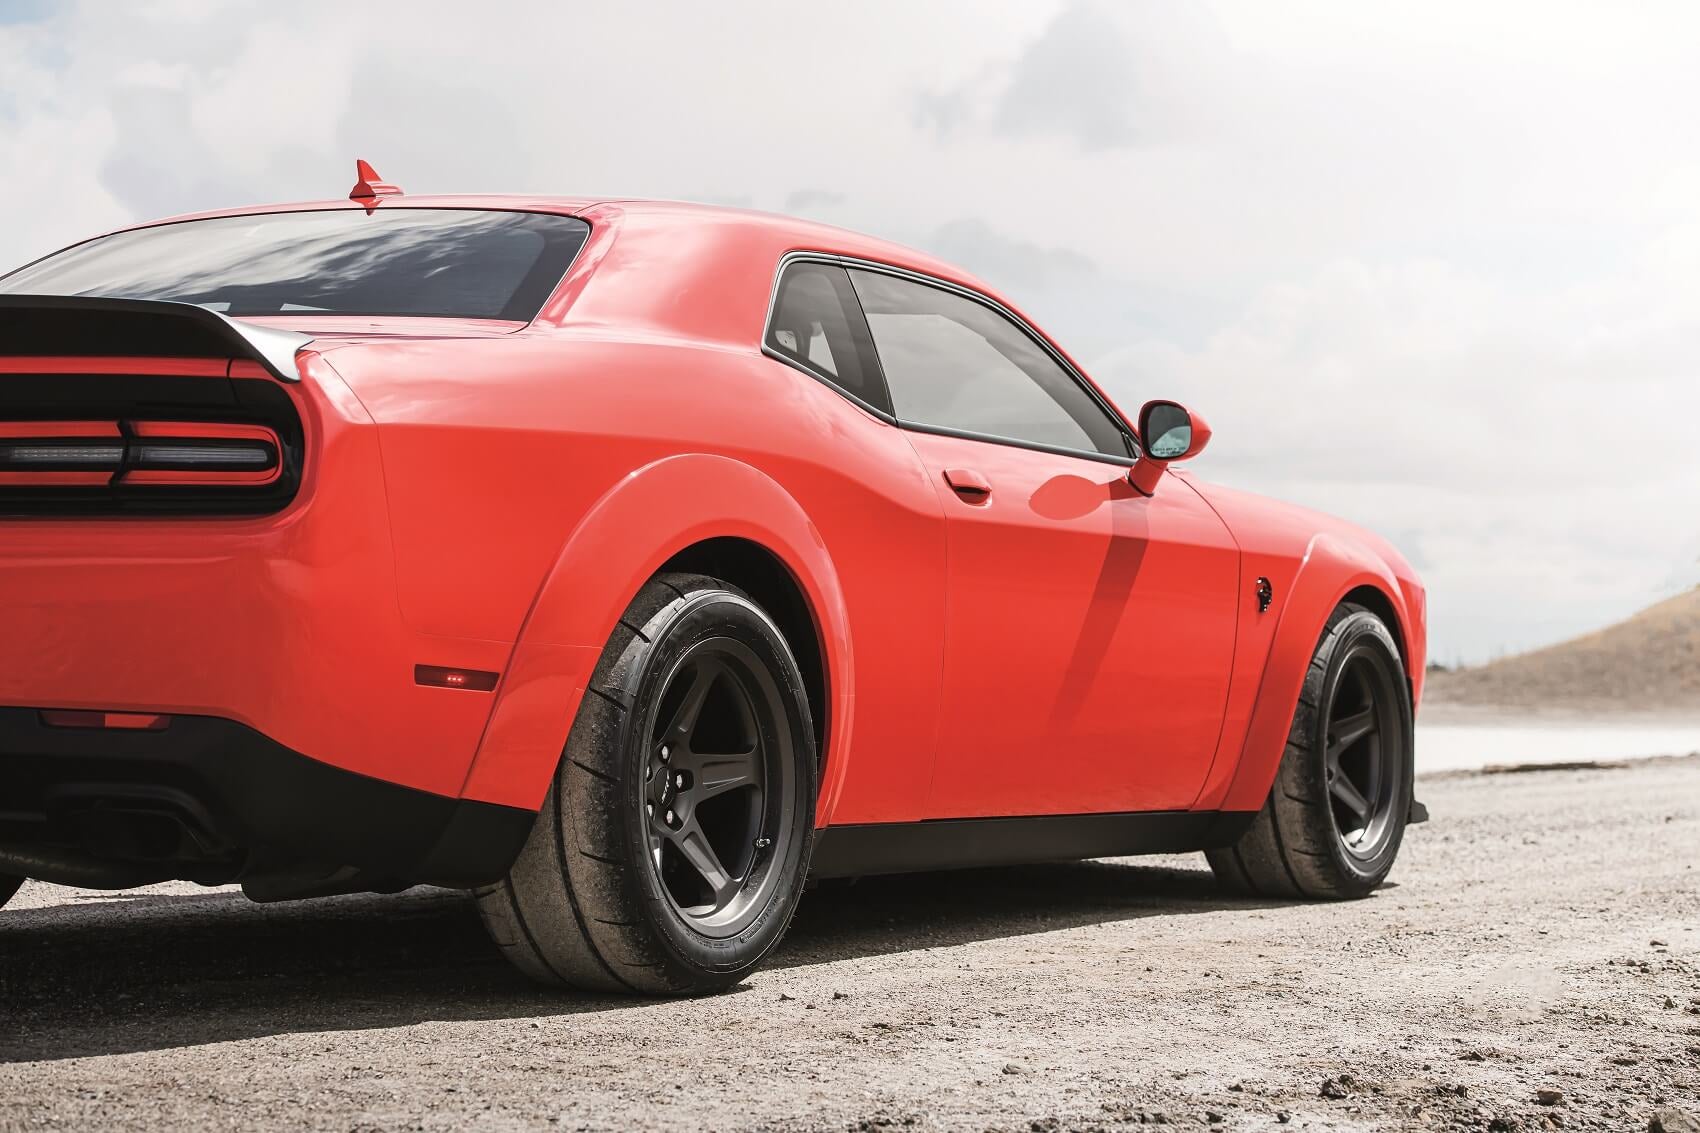 2022 Dodge Challenger: Exciting Engine Performance